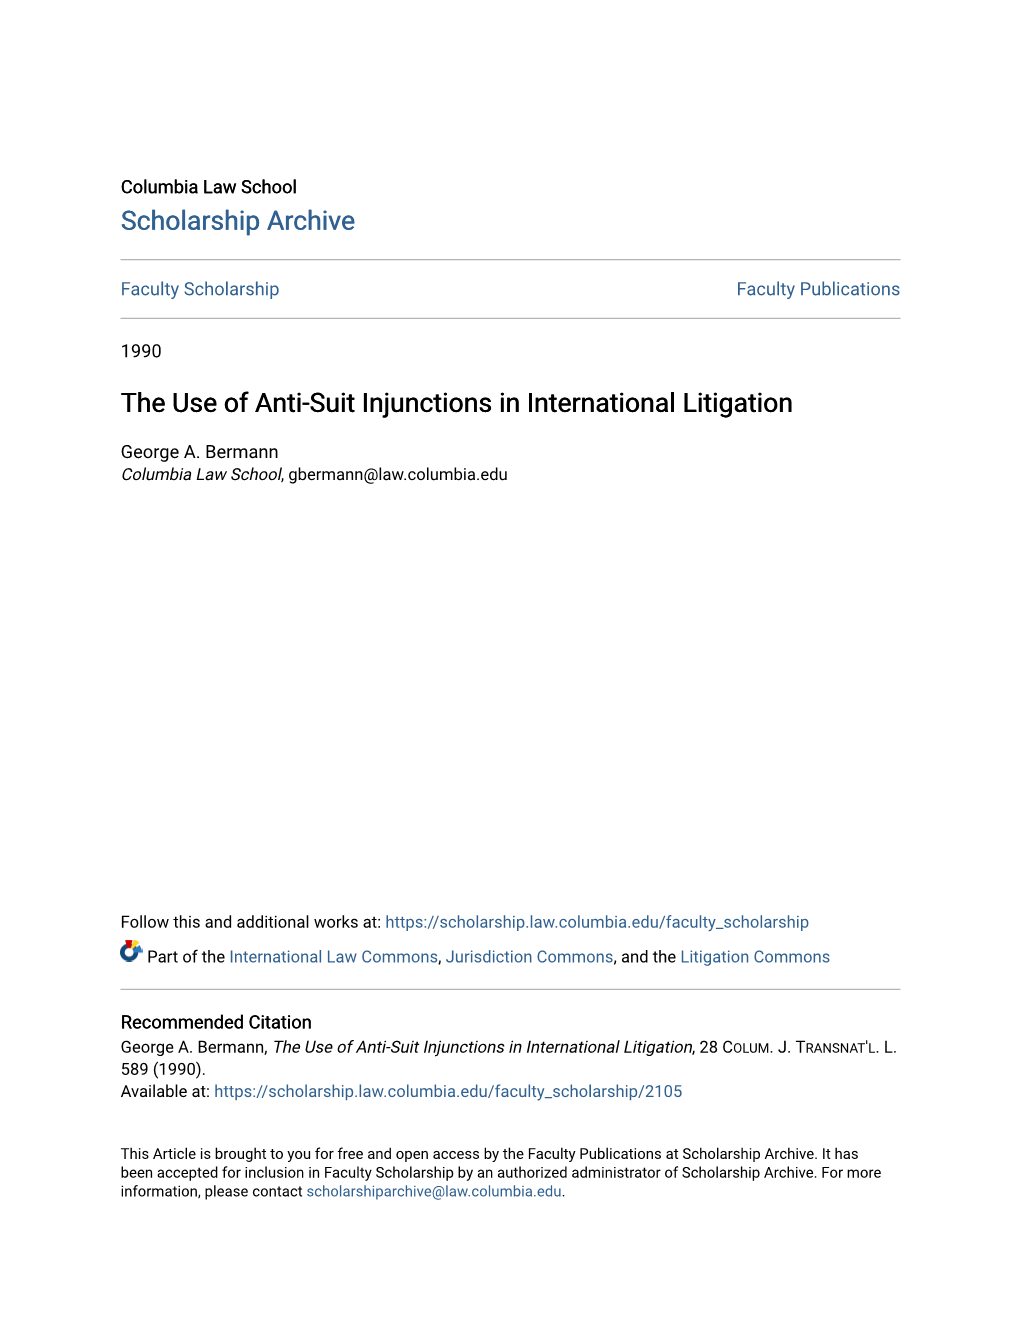 The Use of Anti-Suit Injunctions in International Litigation